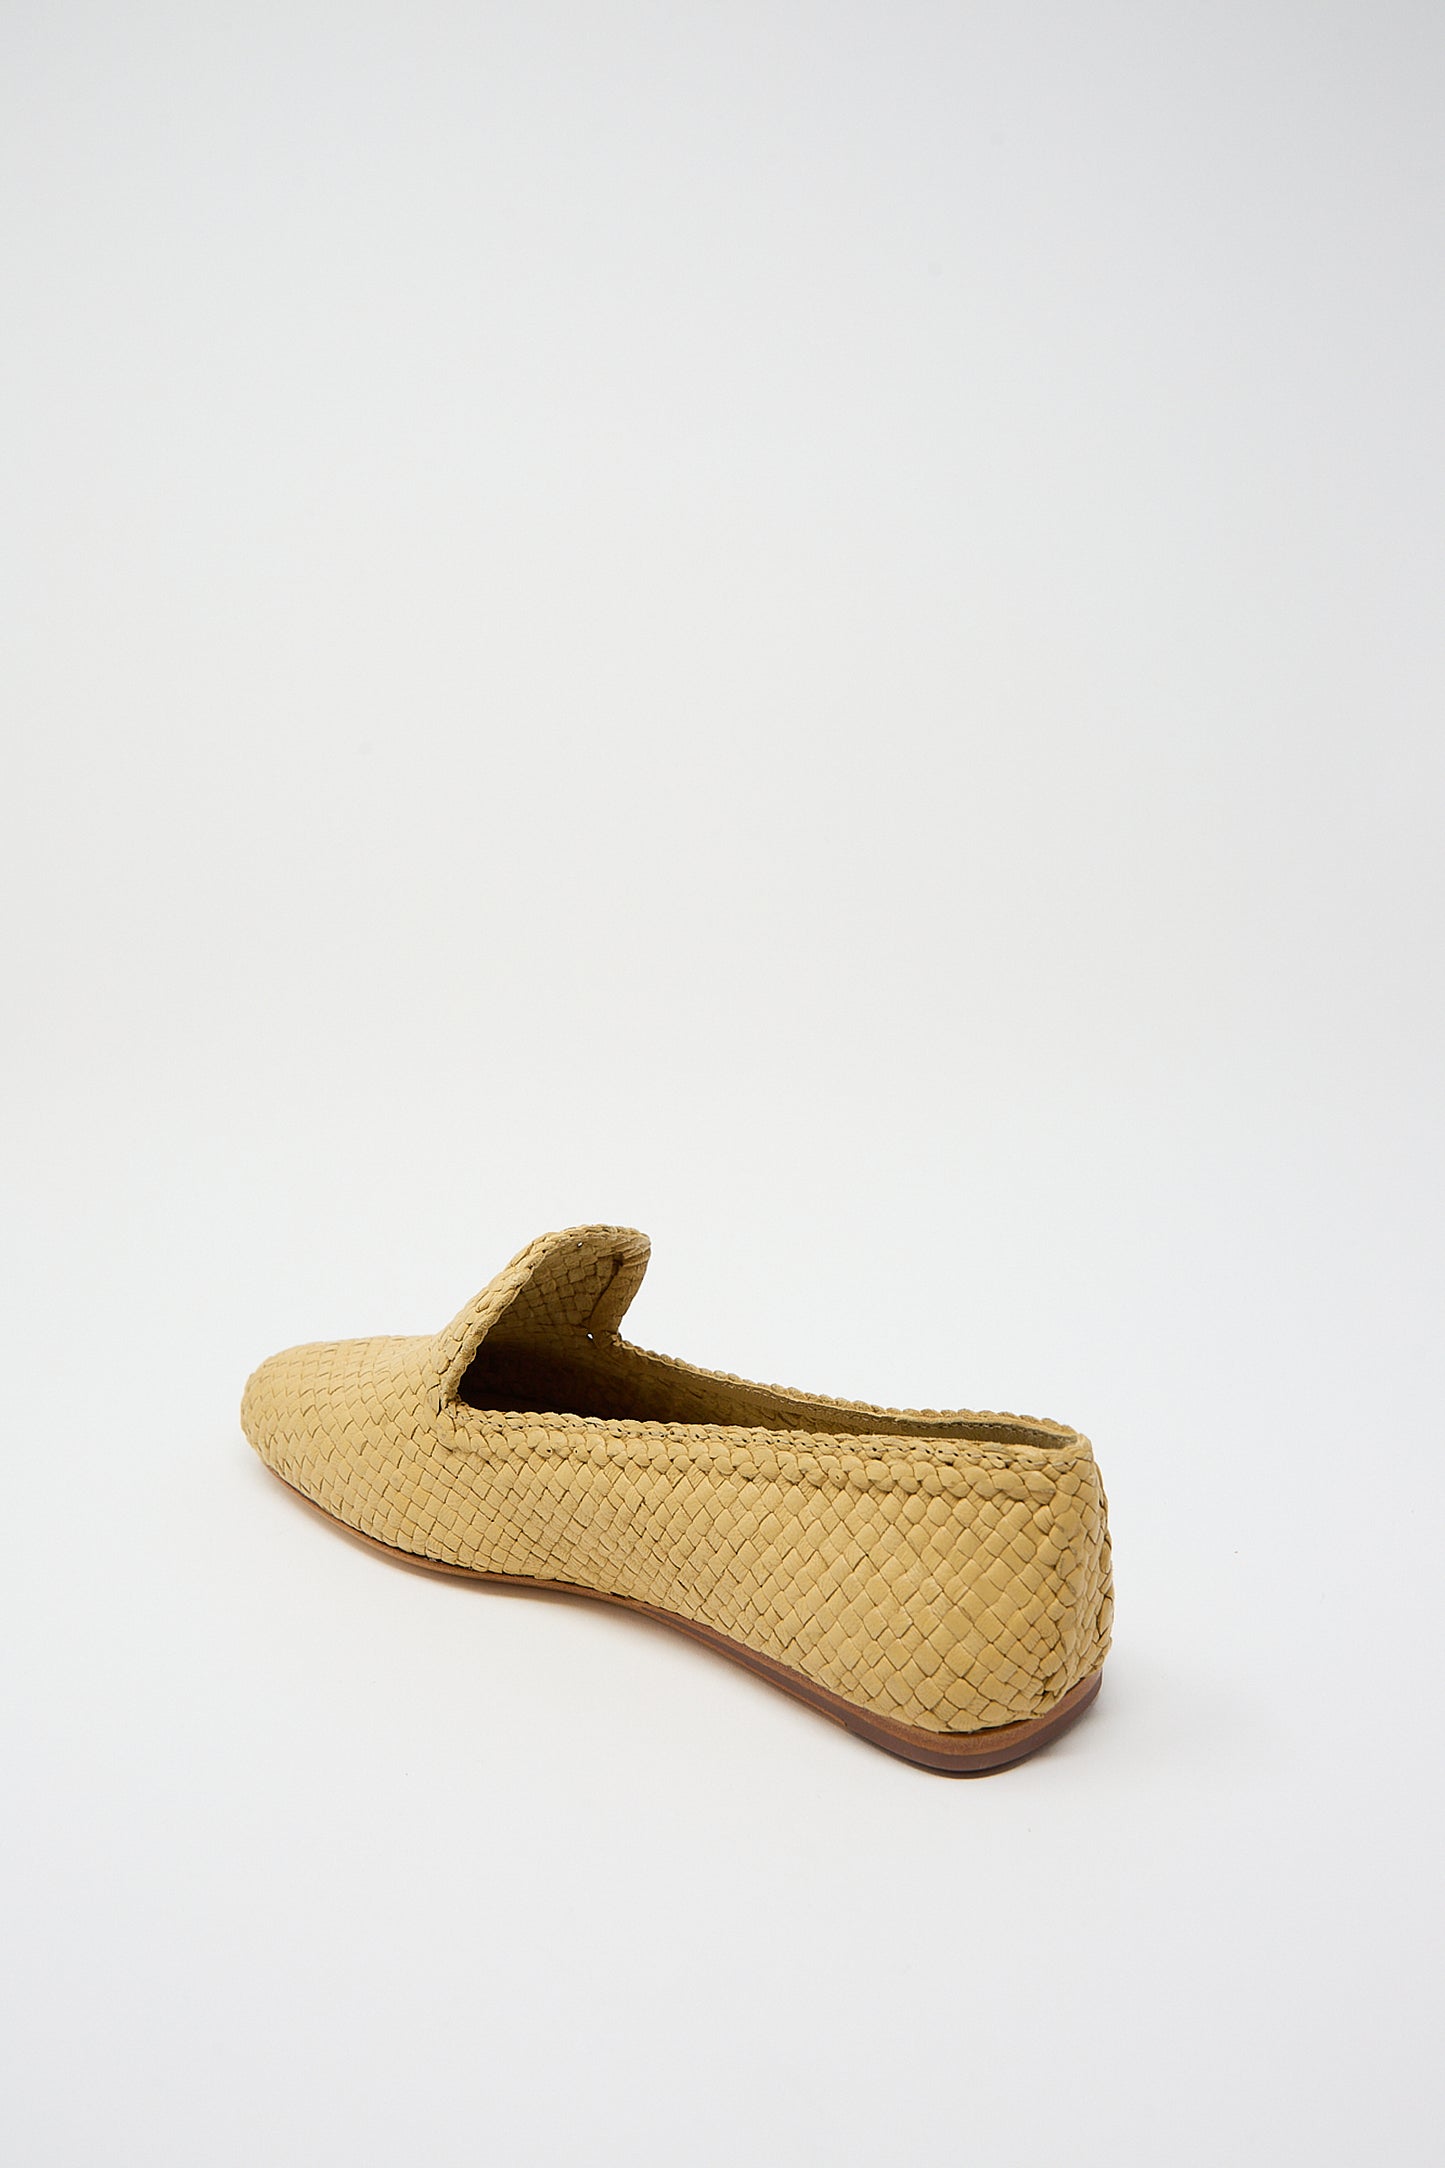 Woven beige Damas Slipper in Natural made of goatskin leather on a white background by Dragon Diffusion.